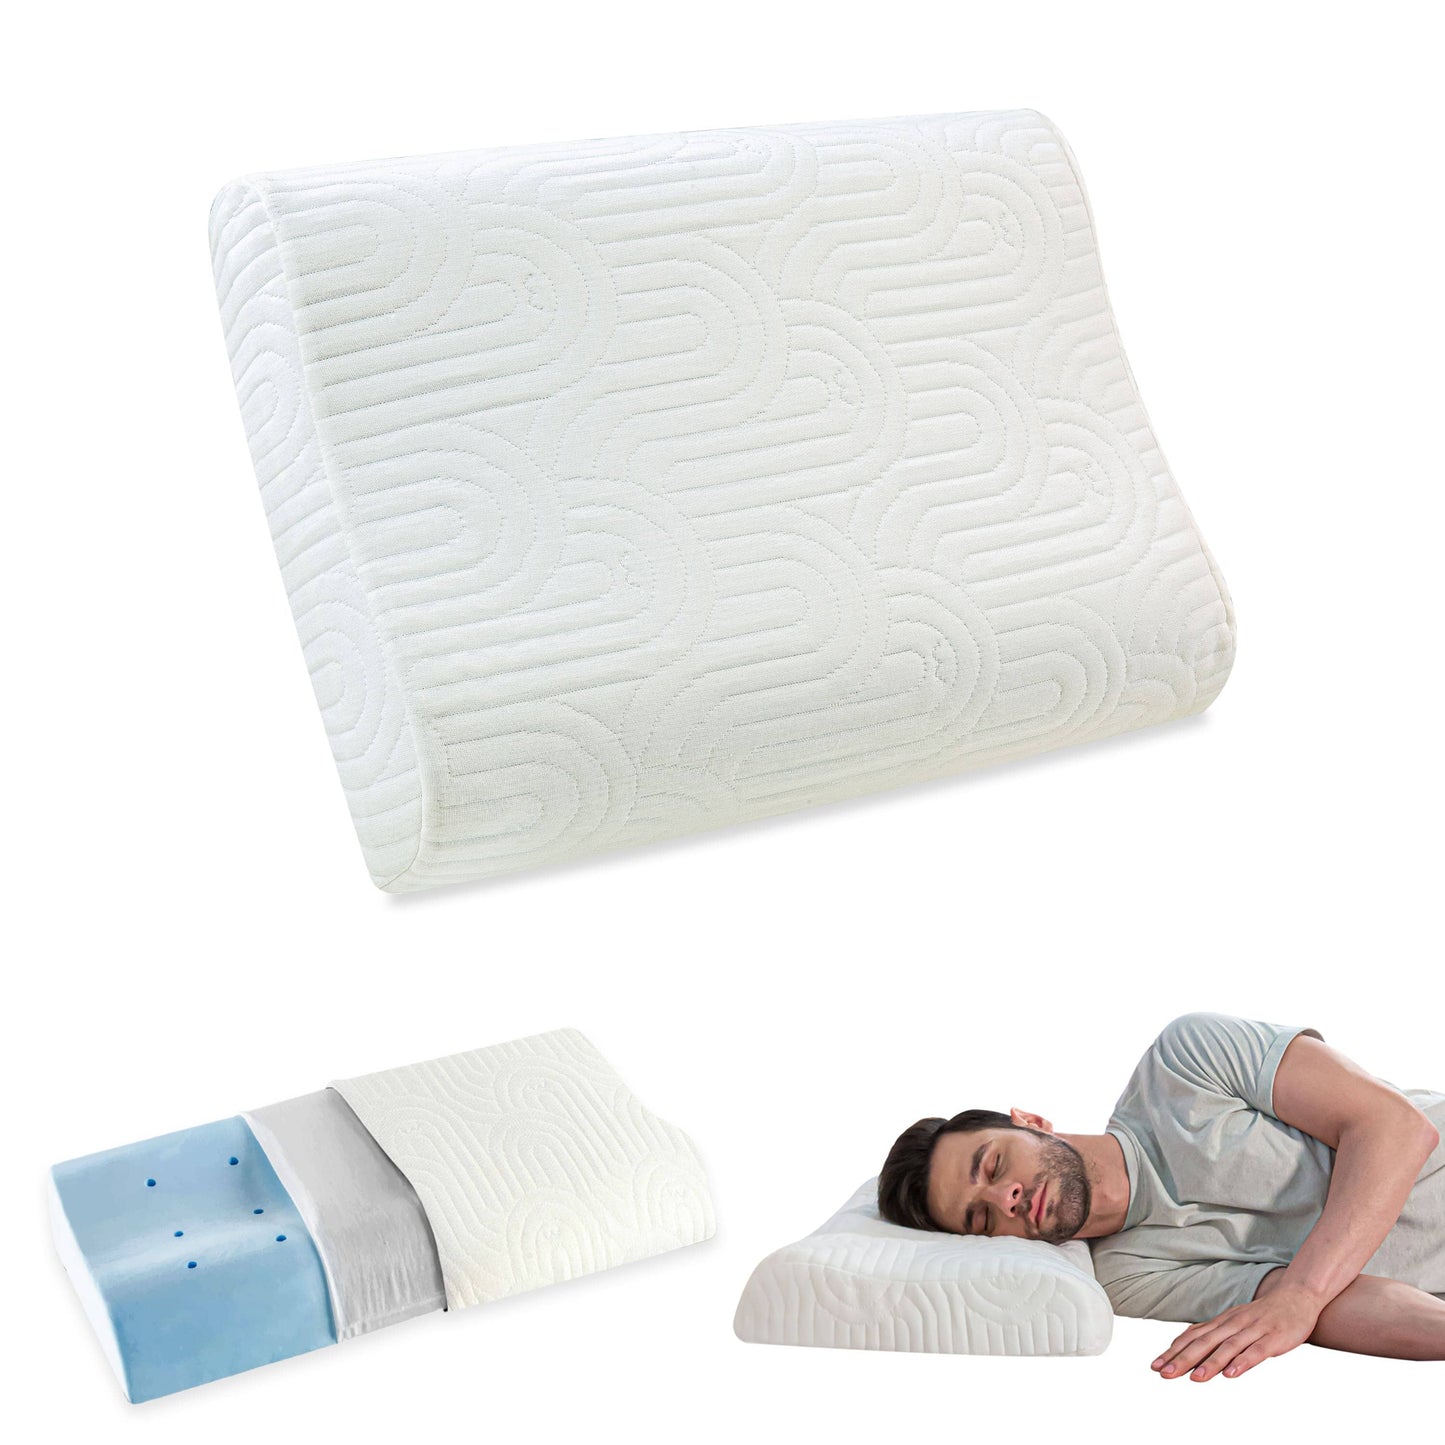 Aloe - Cooling Gel Memory Foam Cervical Pillow - Contour - Medium Firm Contour Pillow The White Willow X-Small Multi 1